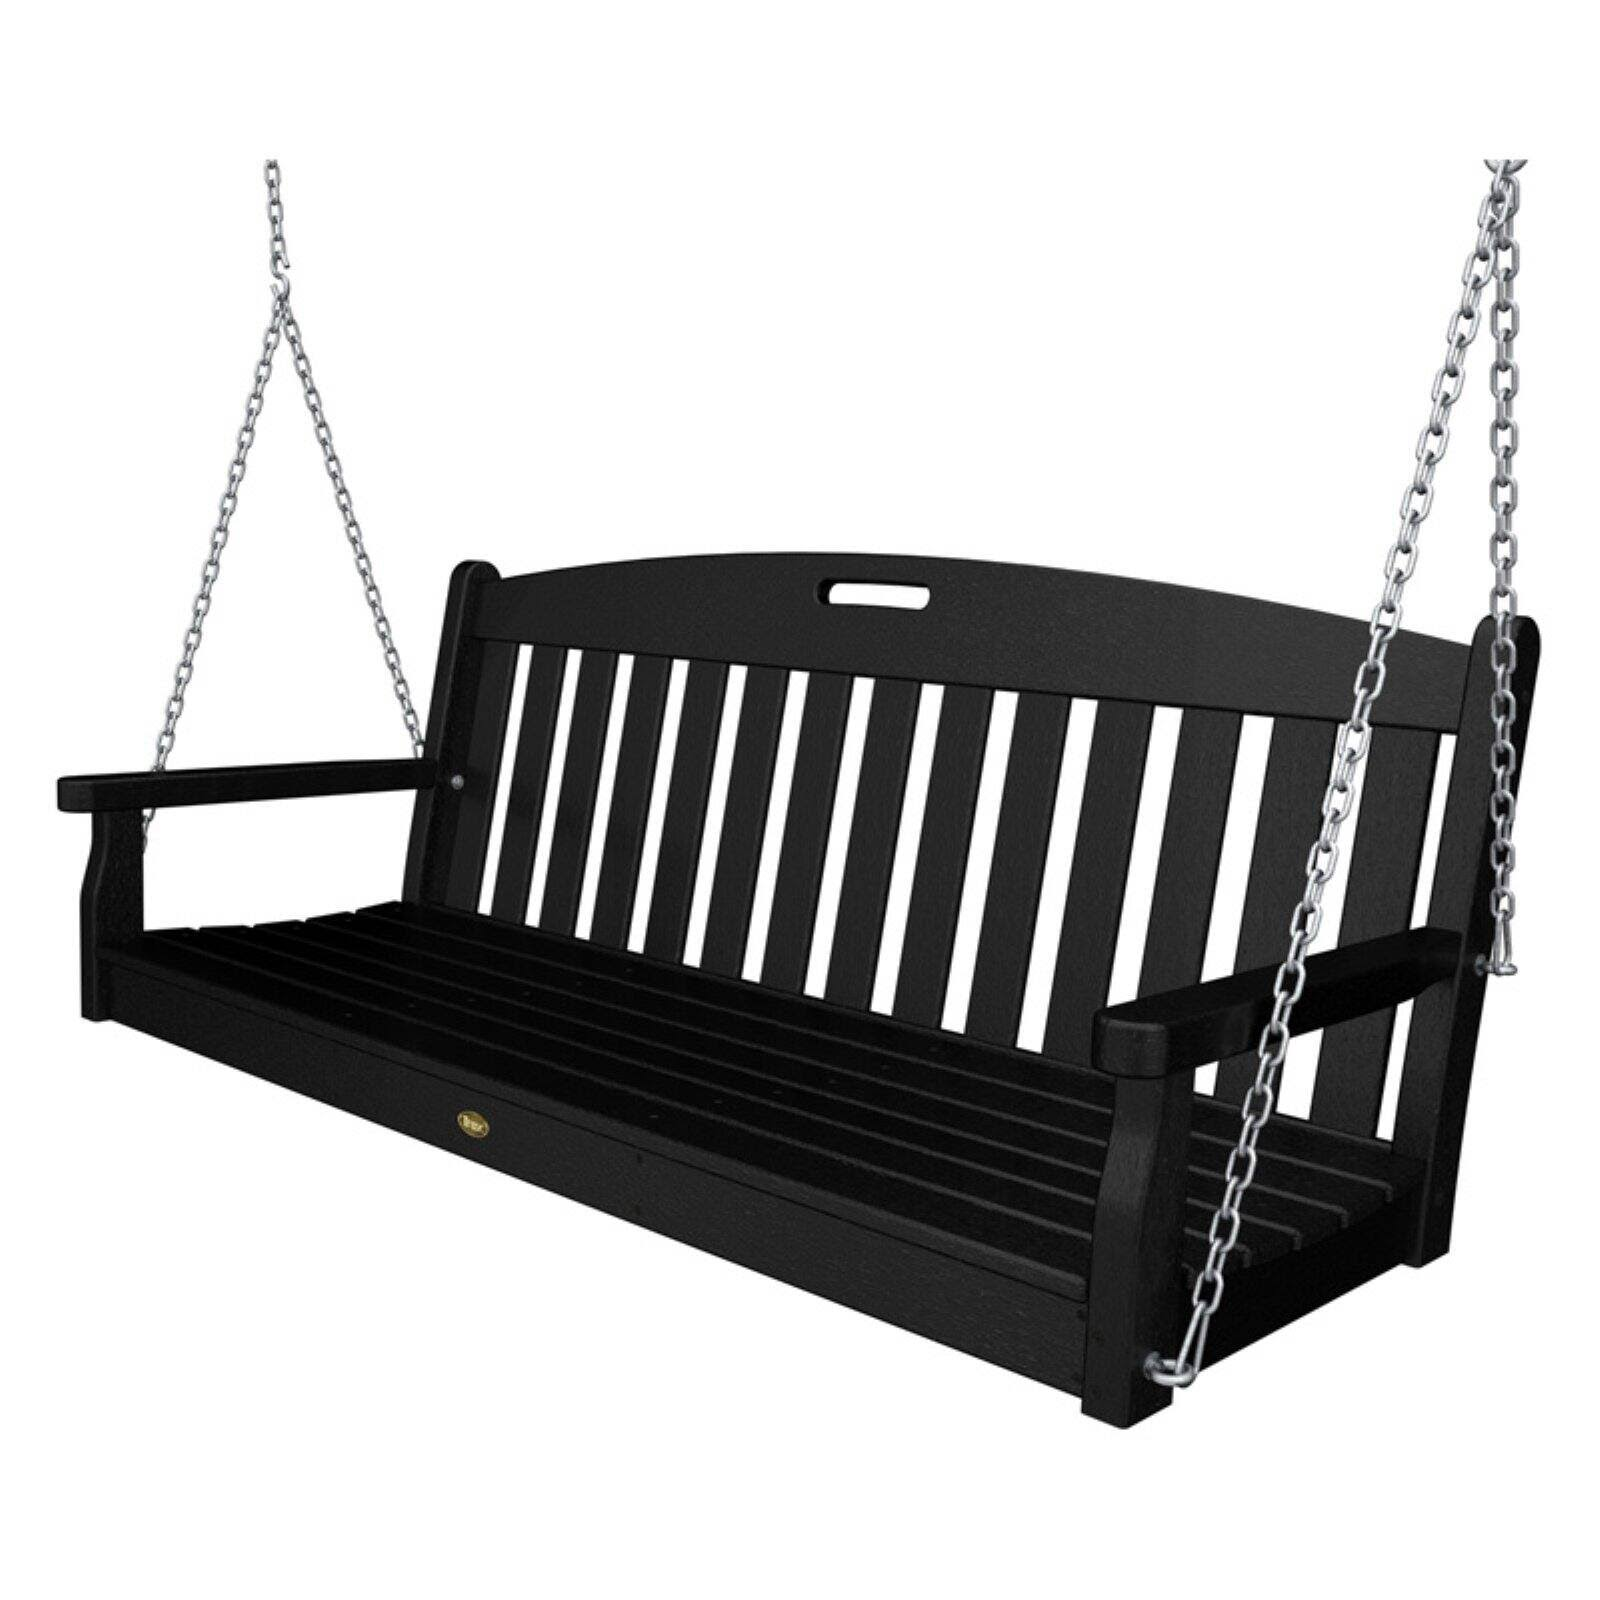 Trex Outdoor Furniture Yacht Club Swing  C Charcoal Black